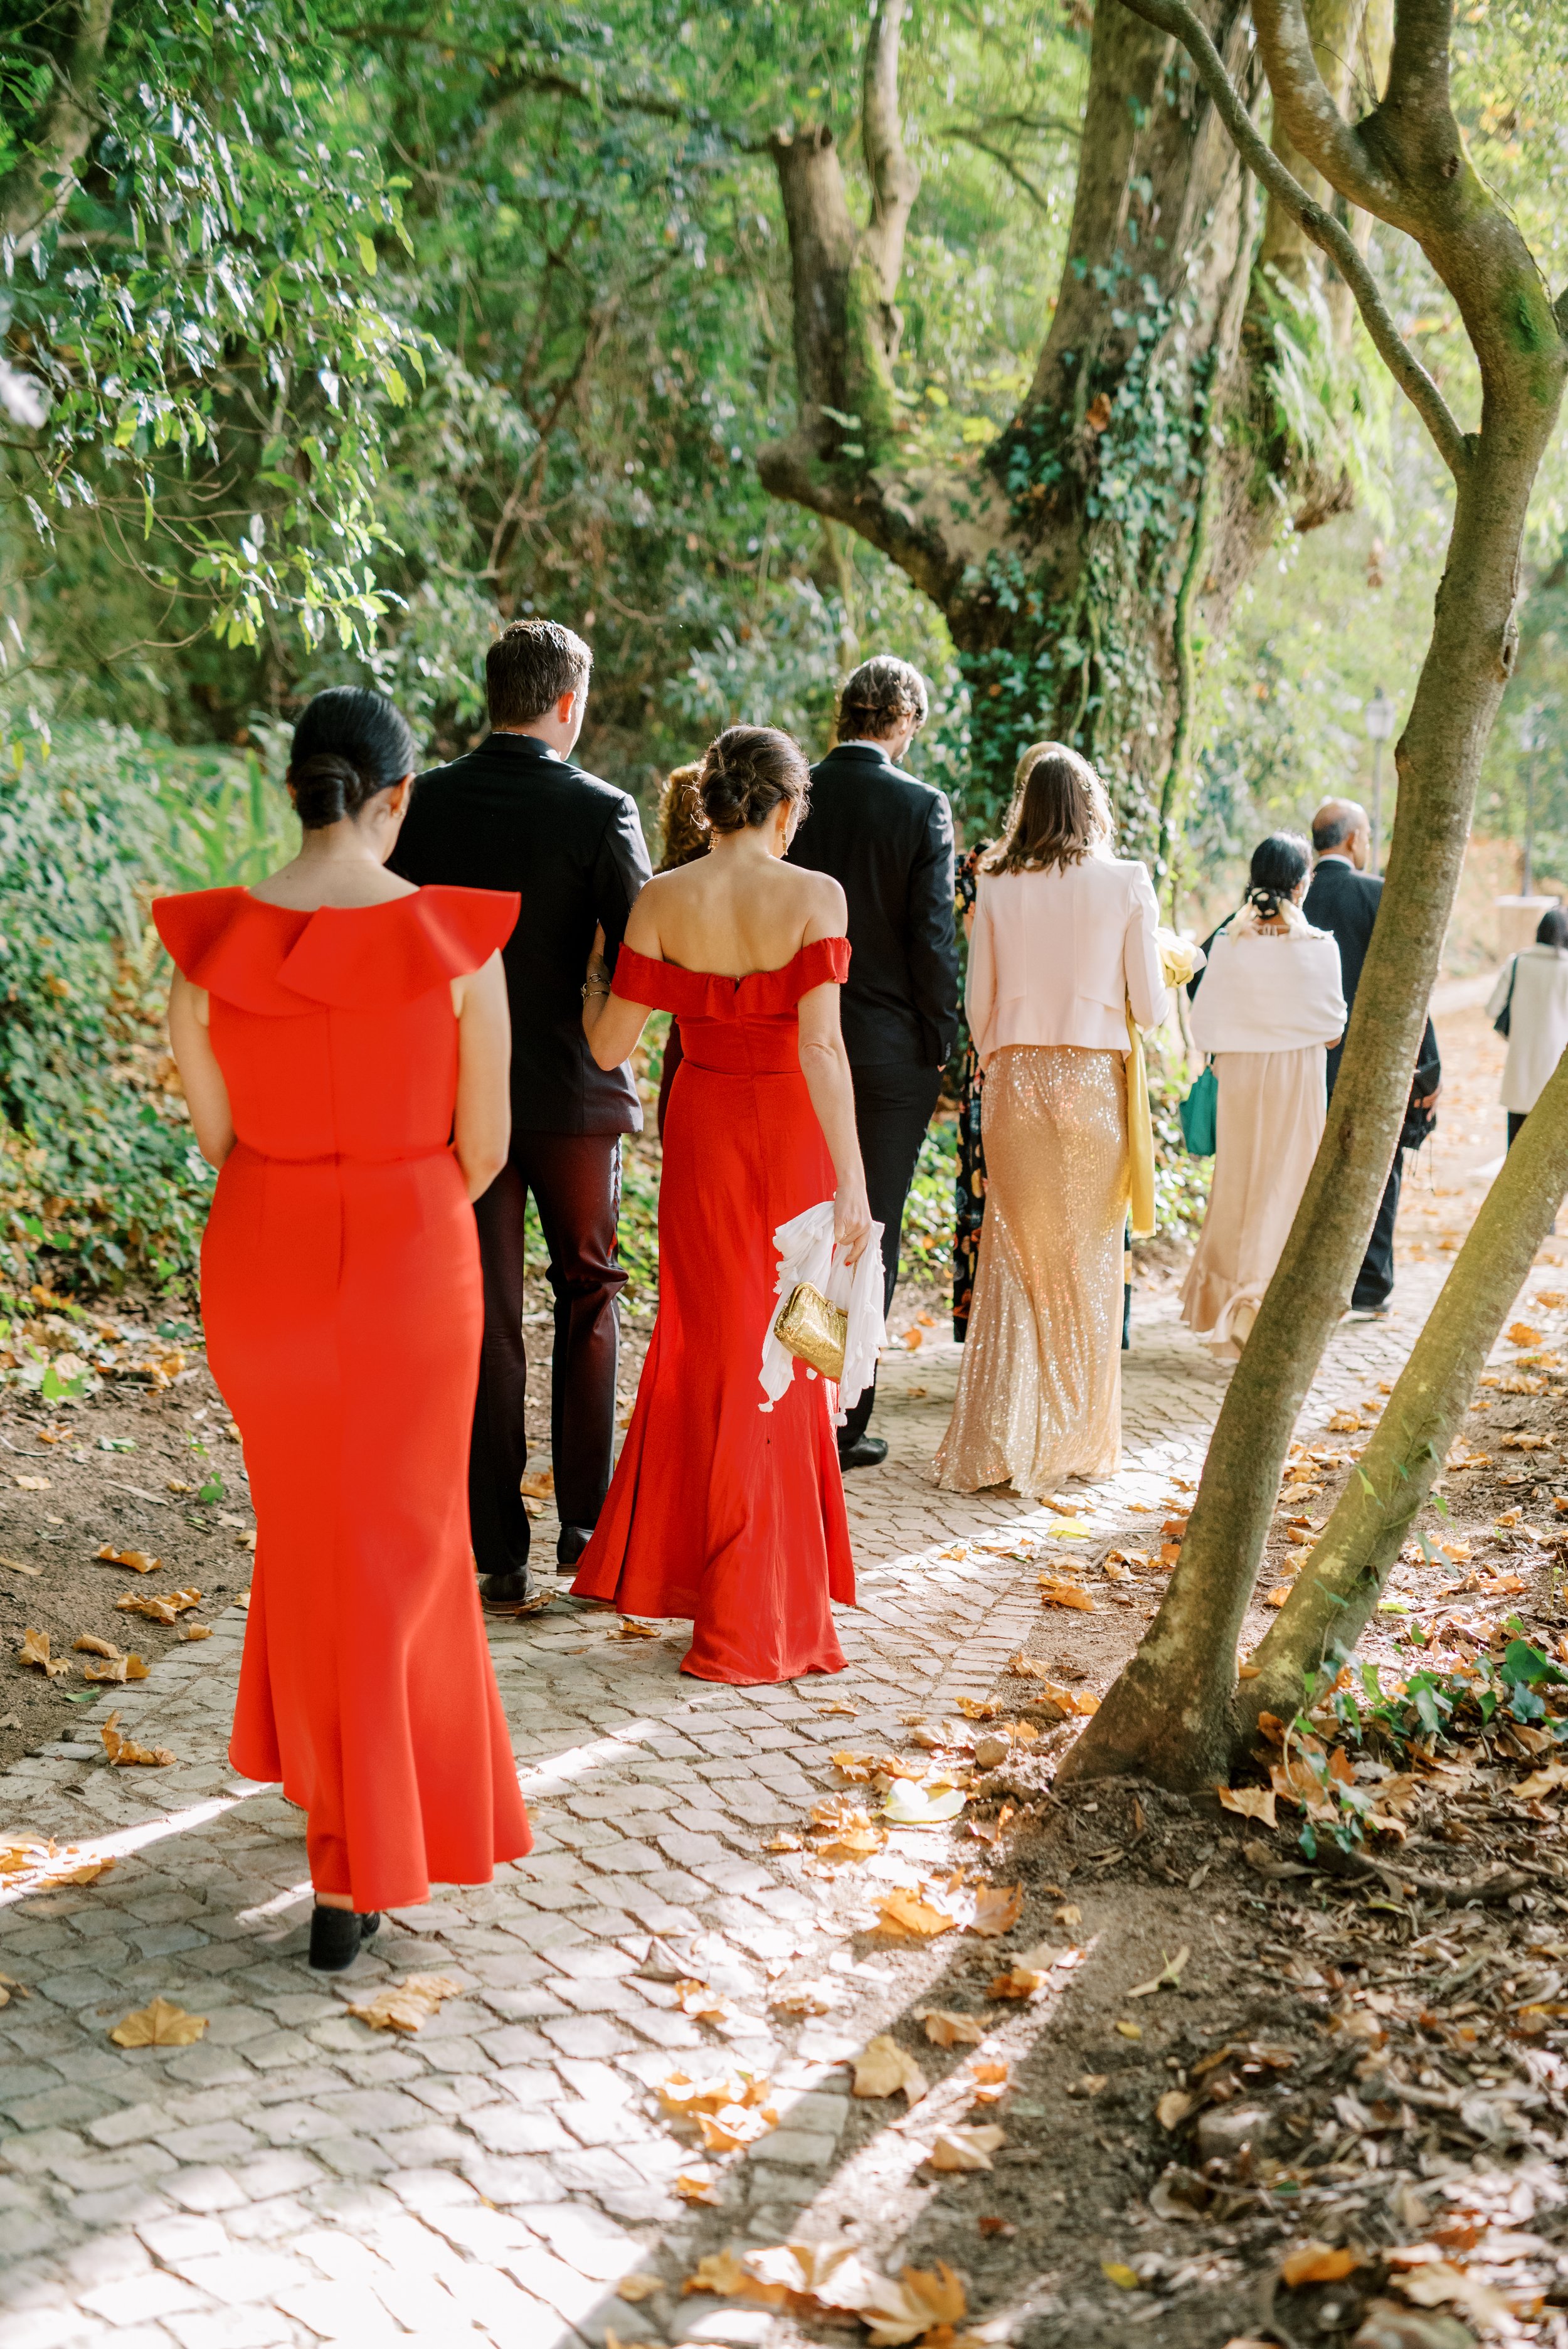 The wedding delegation walking on the path towards the ceremony area between the trees, dressed in elegant, red dresses